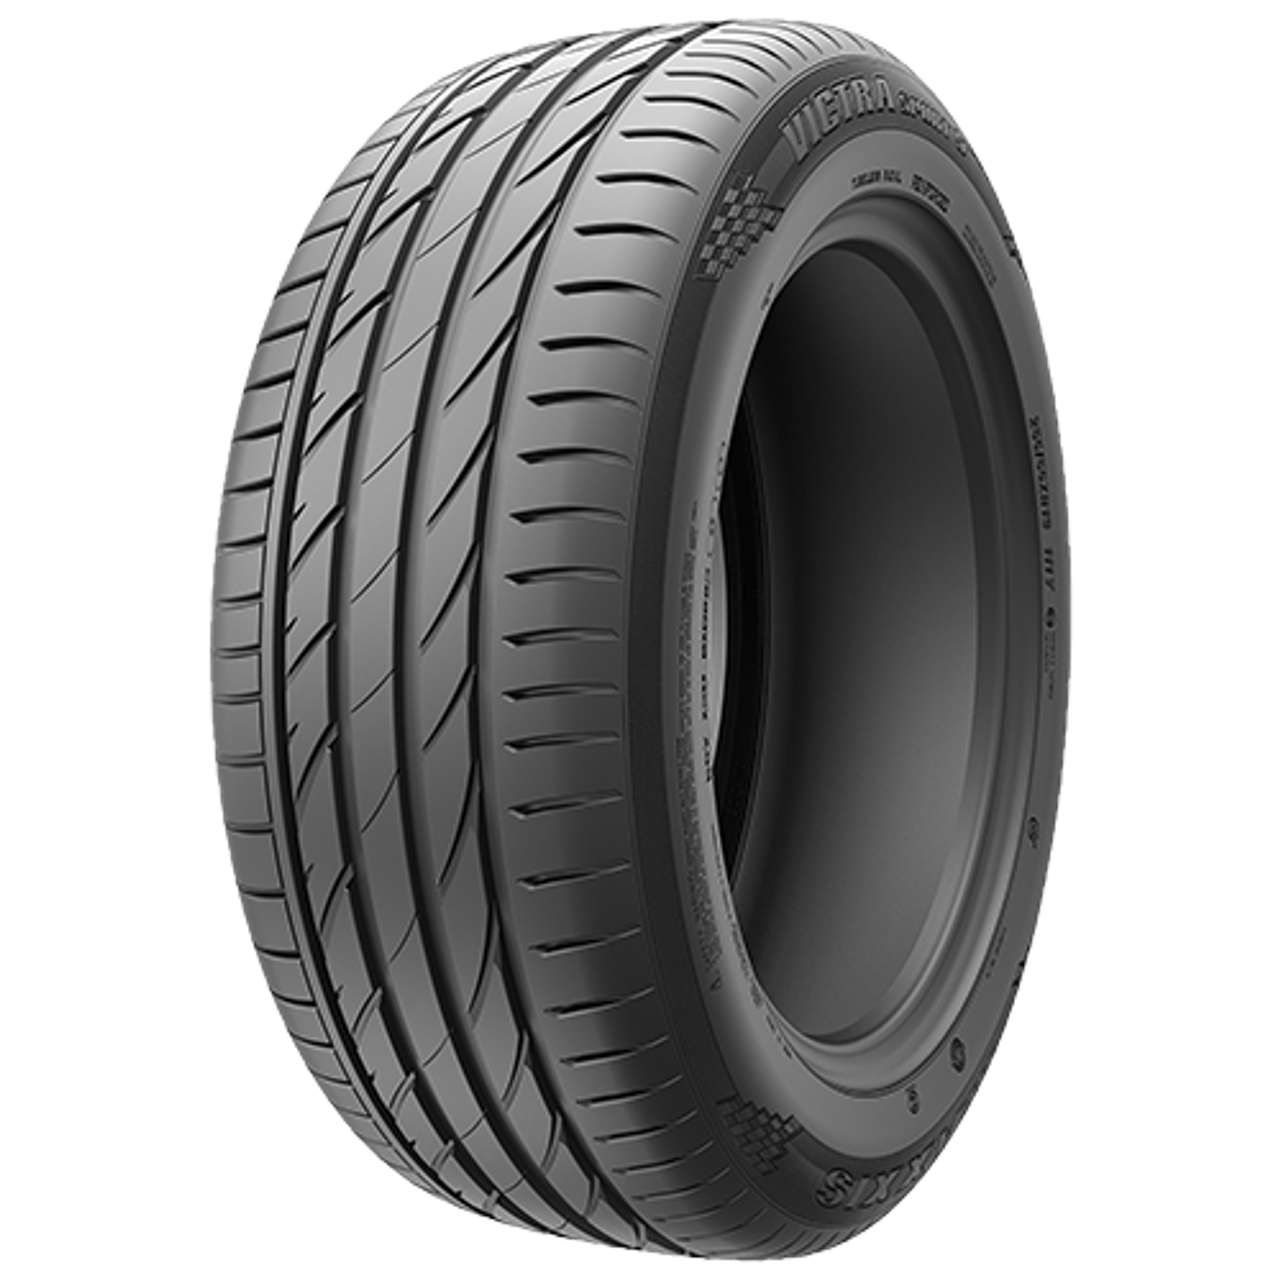 MAXXIS VICTRA SPORT 5 (VS5) 235/45ZR18 98Y MFS BSW